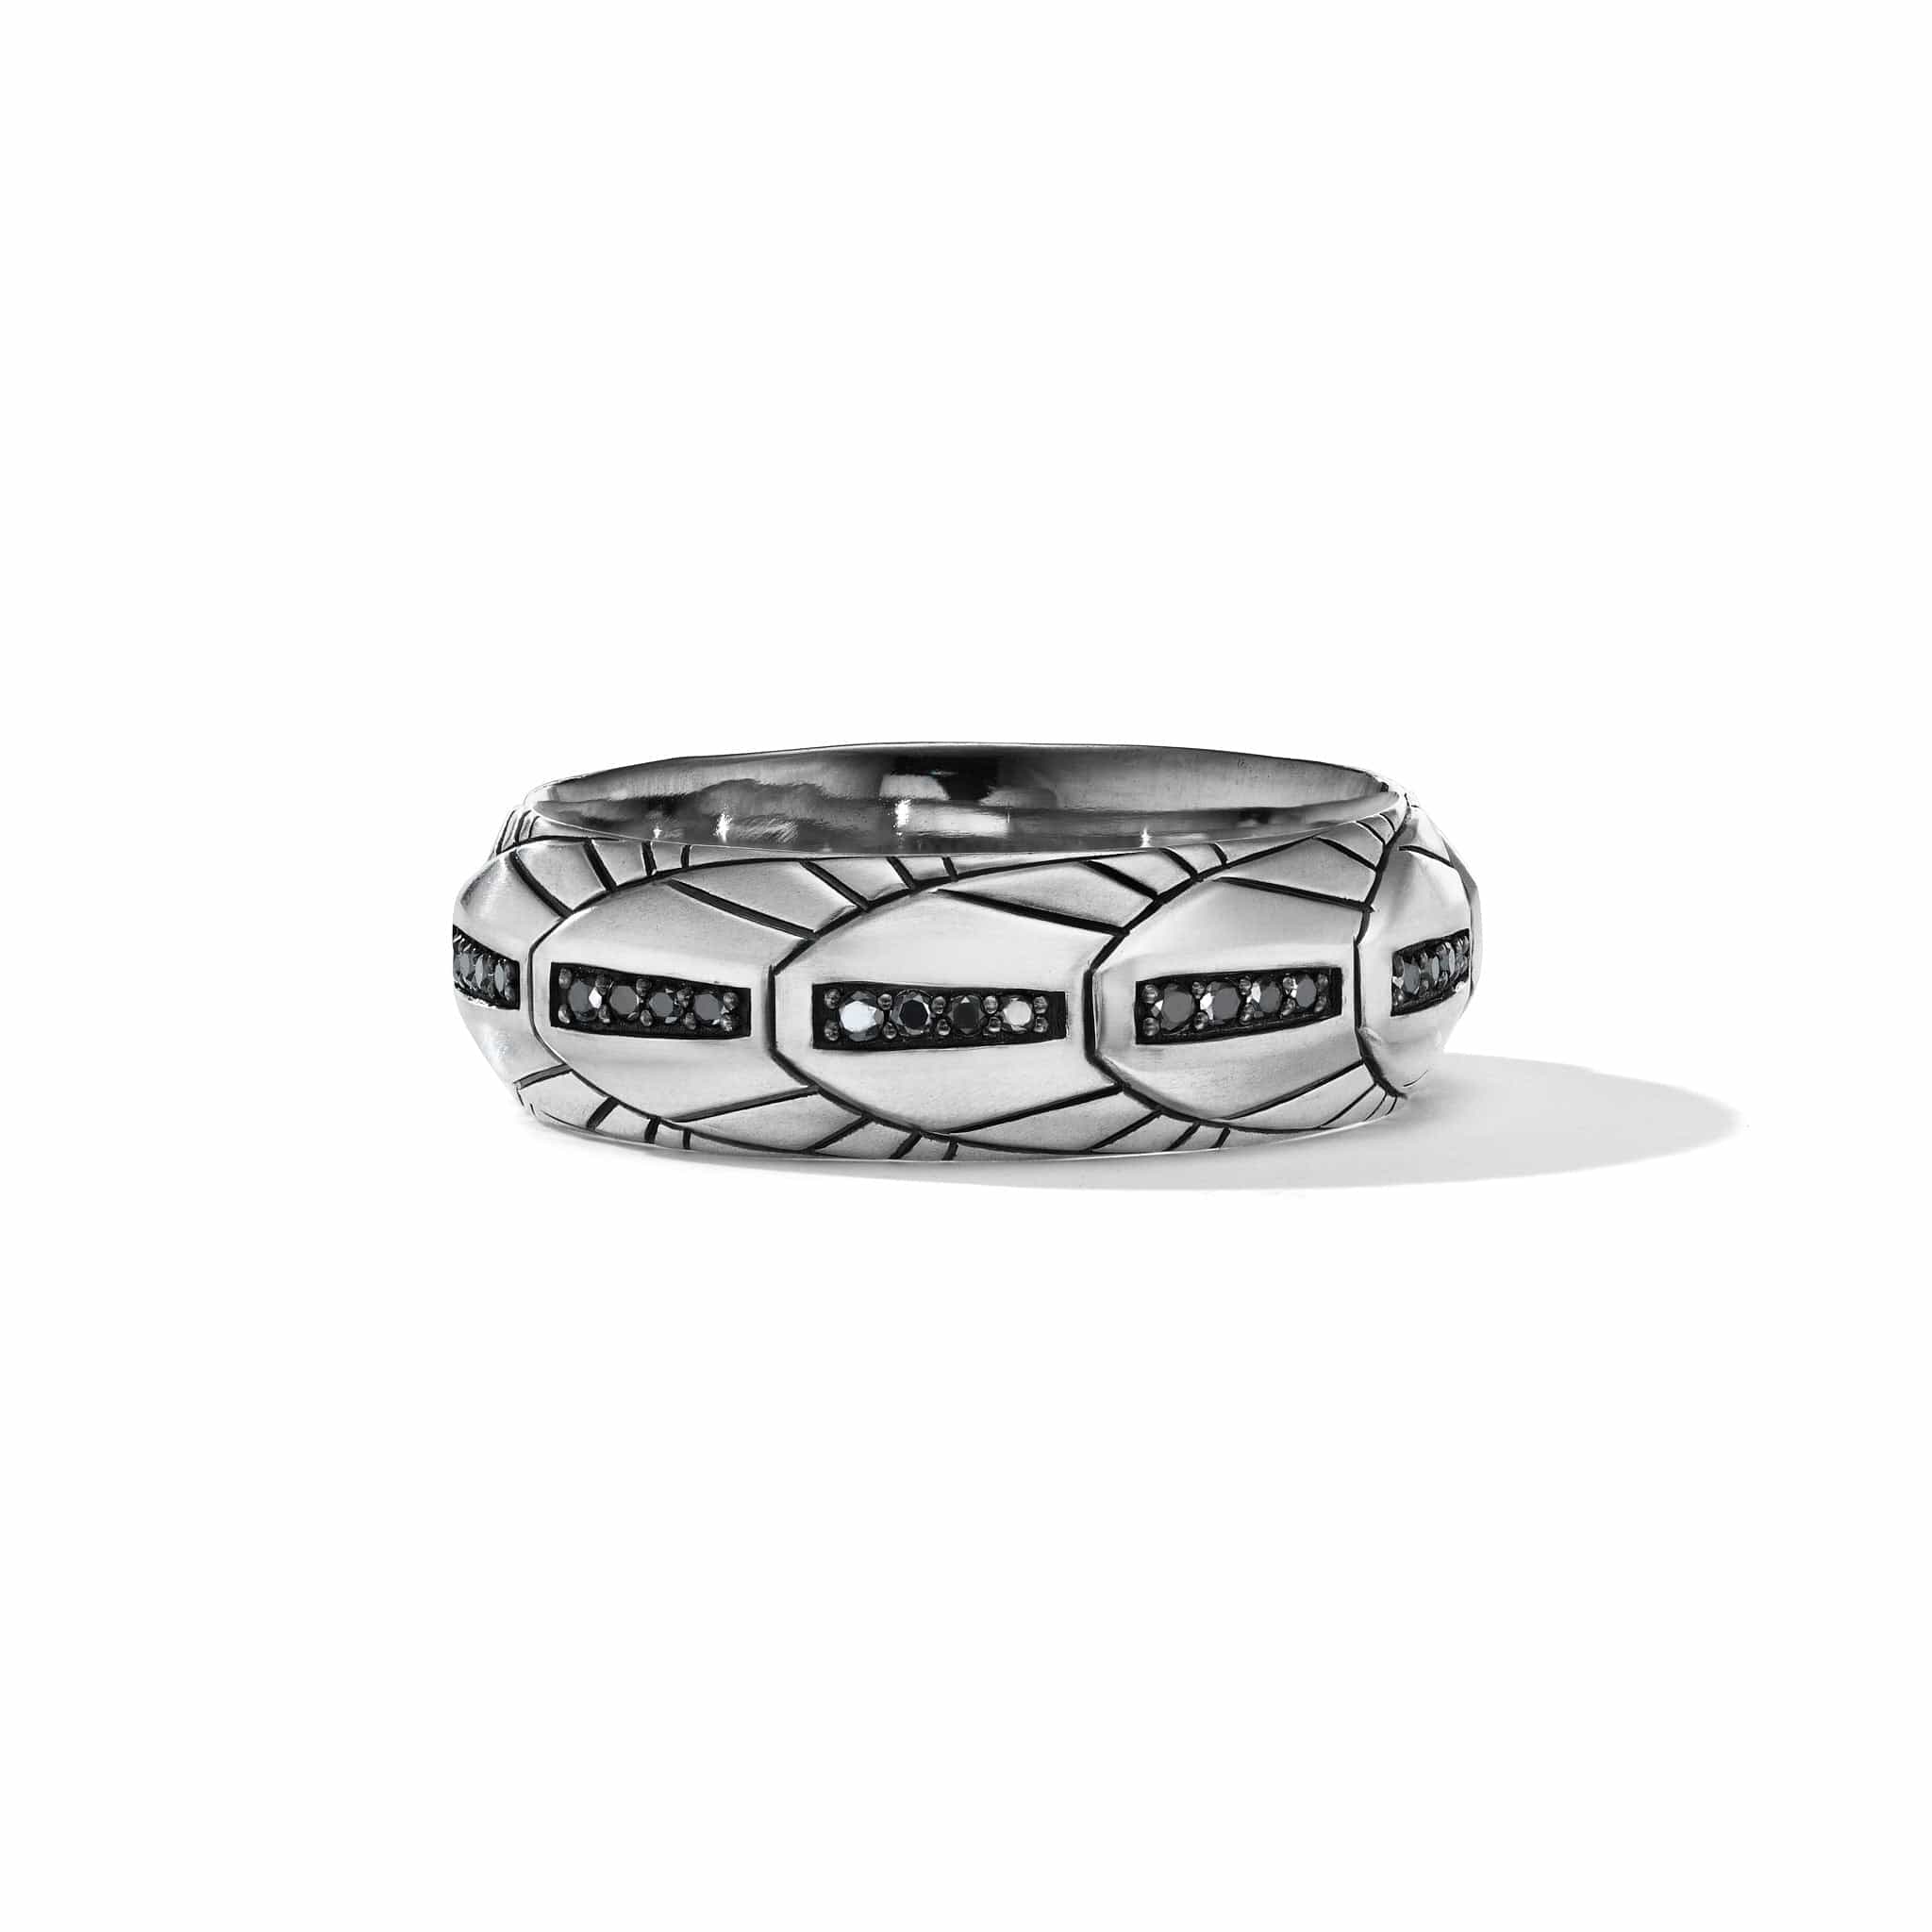 Empire Band Ring with Pavé Black Diamonds, Sterling Silver, Long's Jewelers